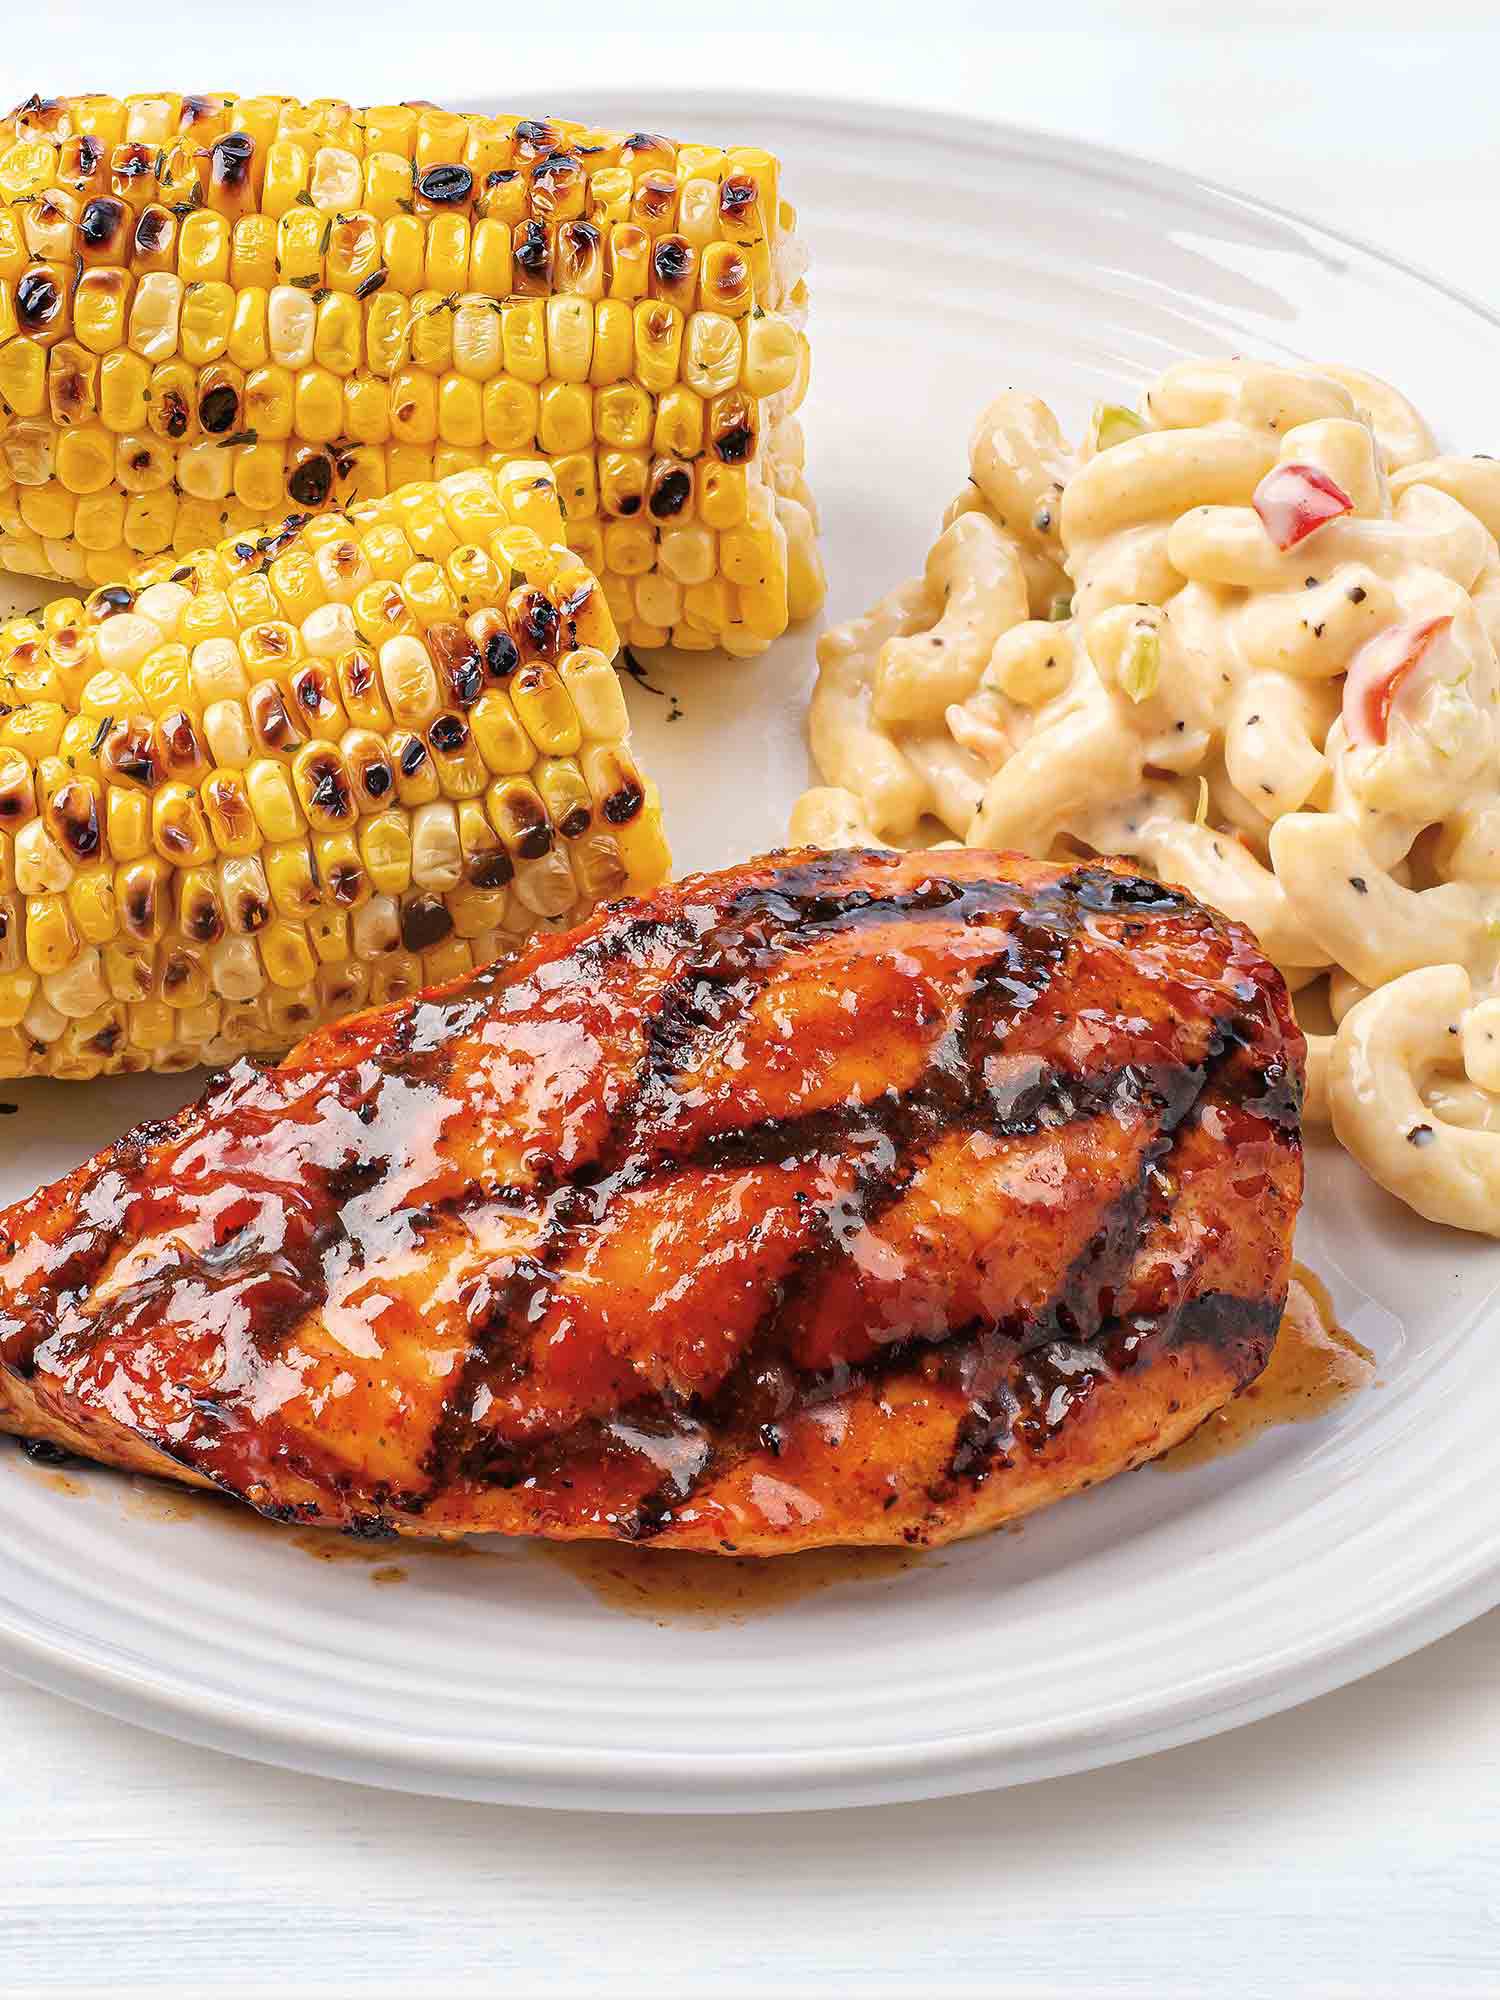 July 4th menu including Memphis barbecue chicken, grilled corn, and sides